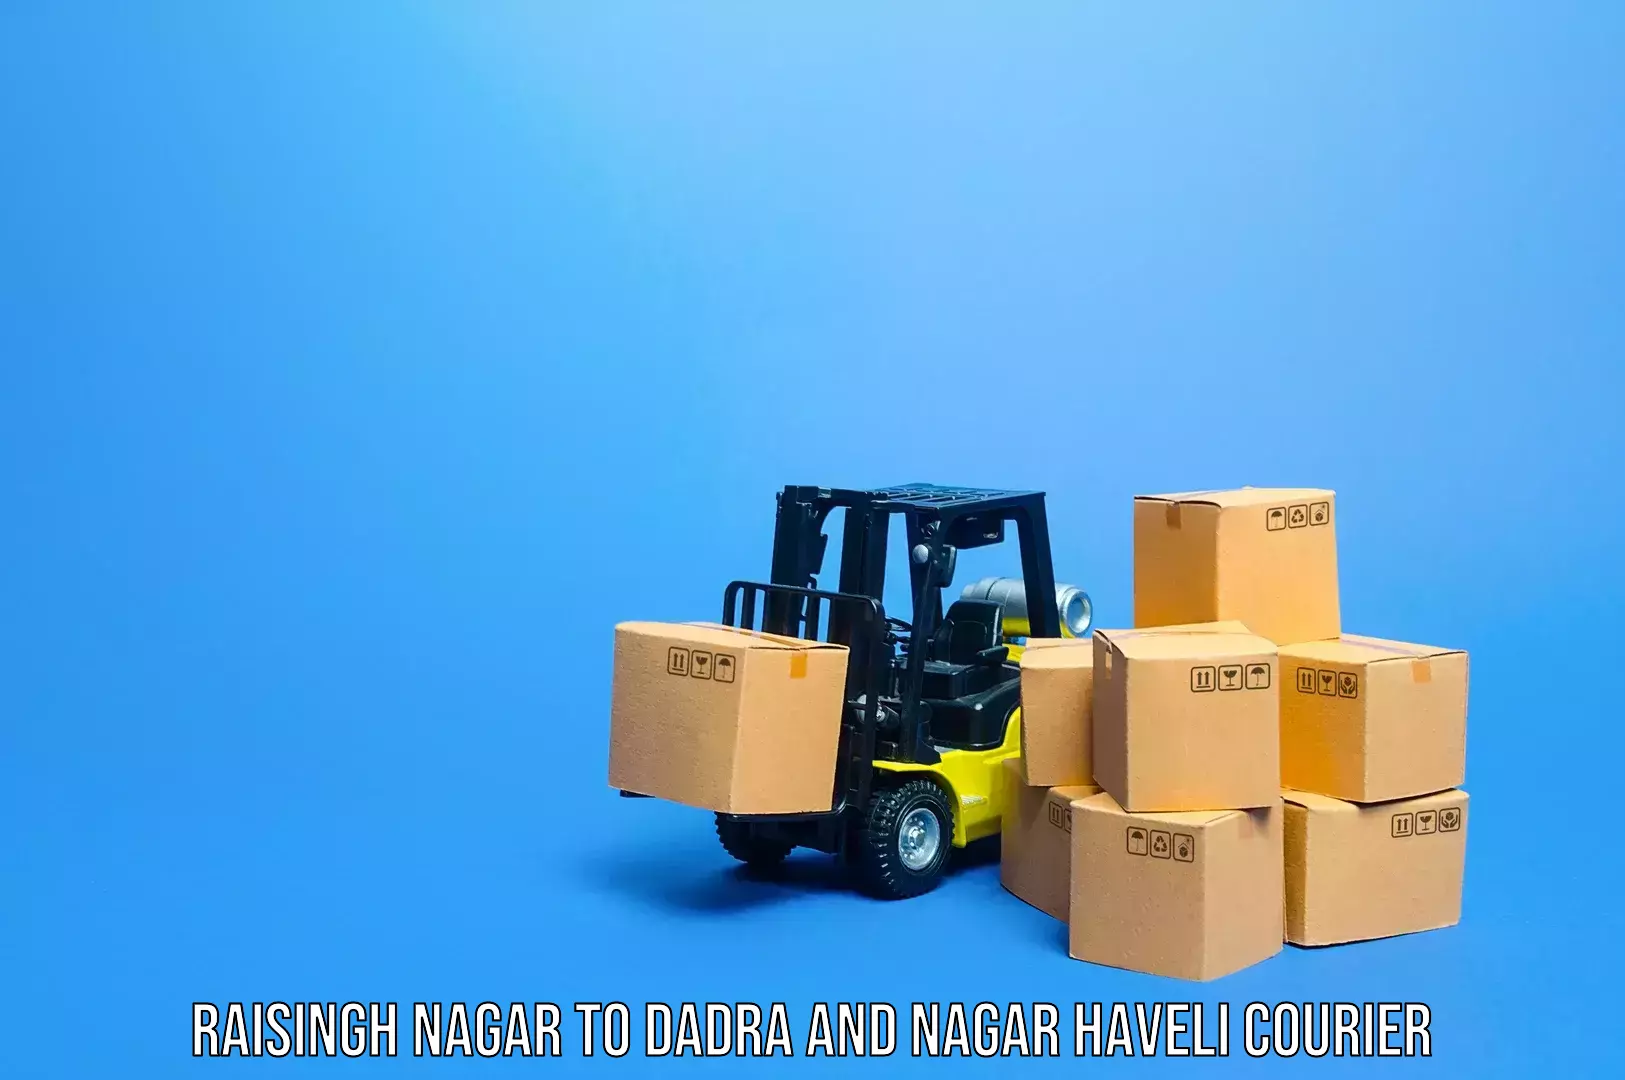 Airport luggage delivery in Raisingh Nagar to Dadra and Nagar Haveli